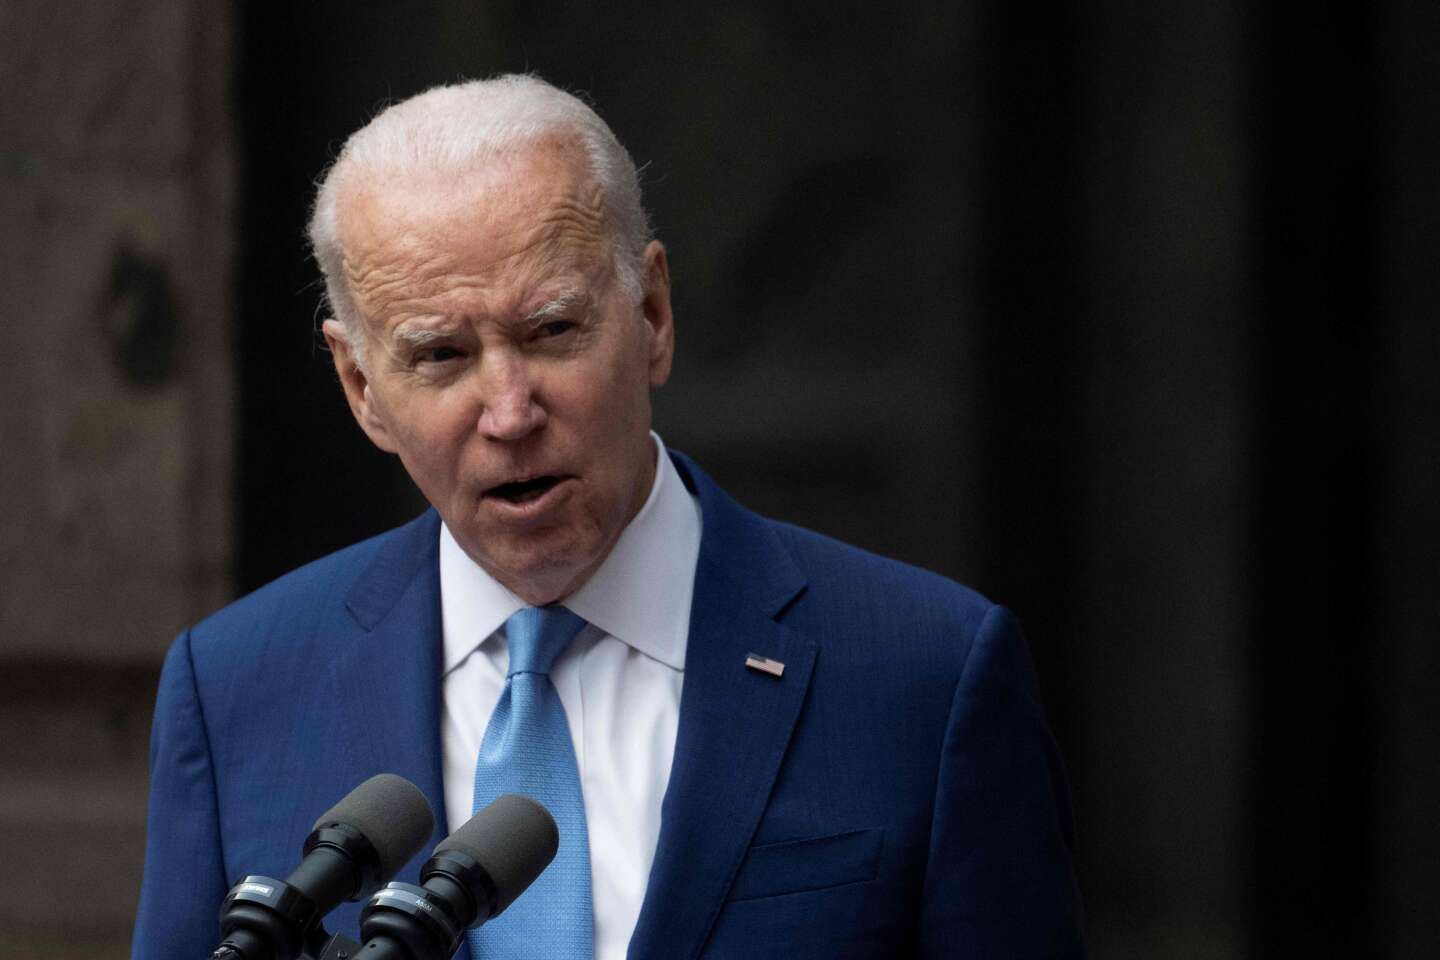 He doesn’t know “what’s in the documents” found at one of Joe Biden’s former workplaces